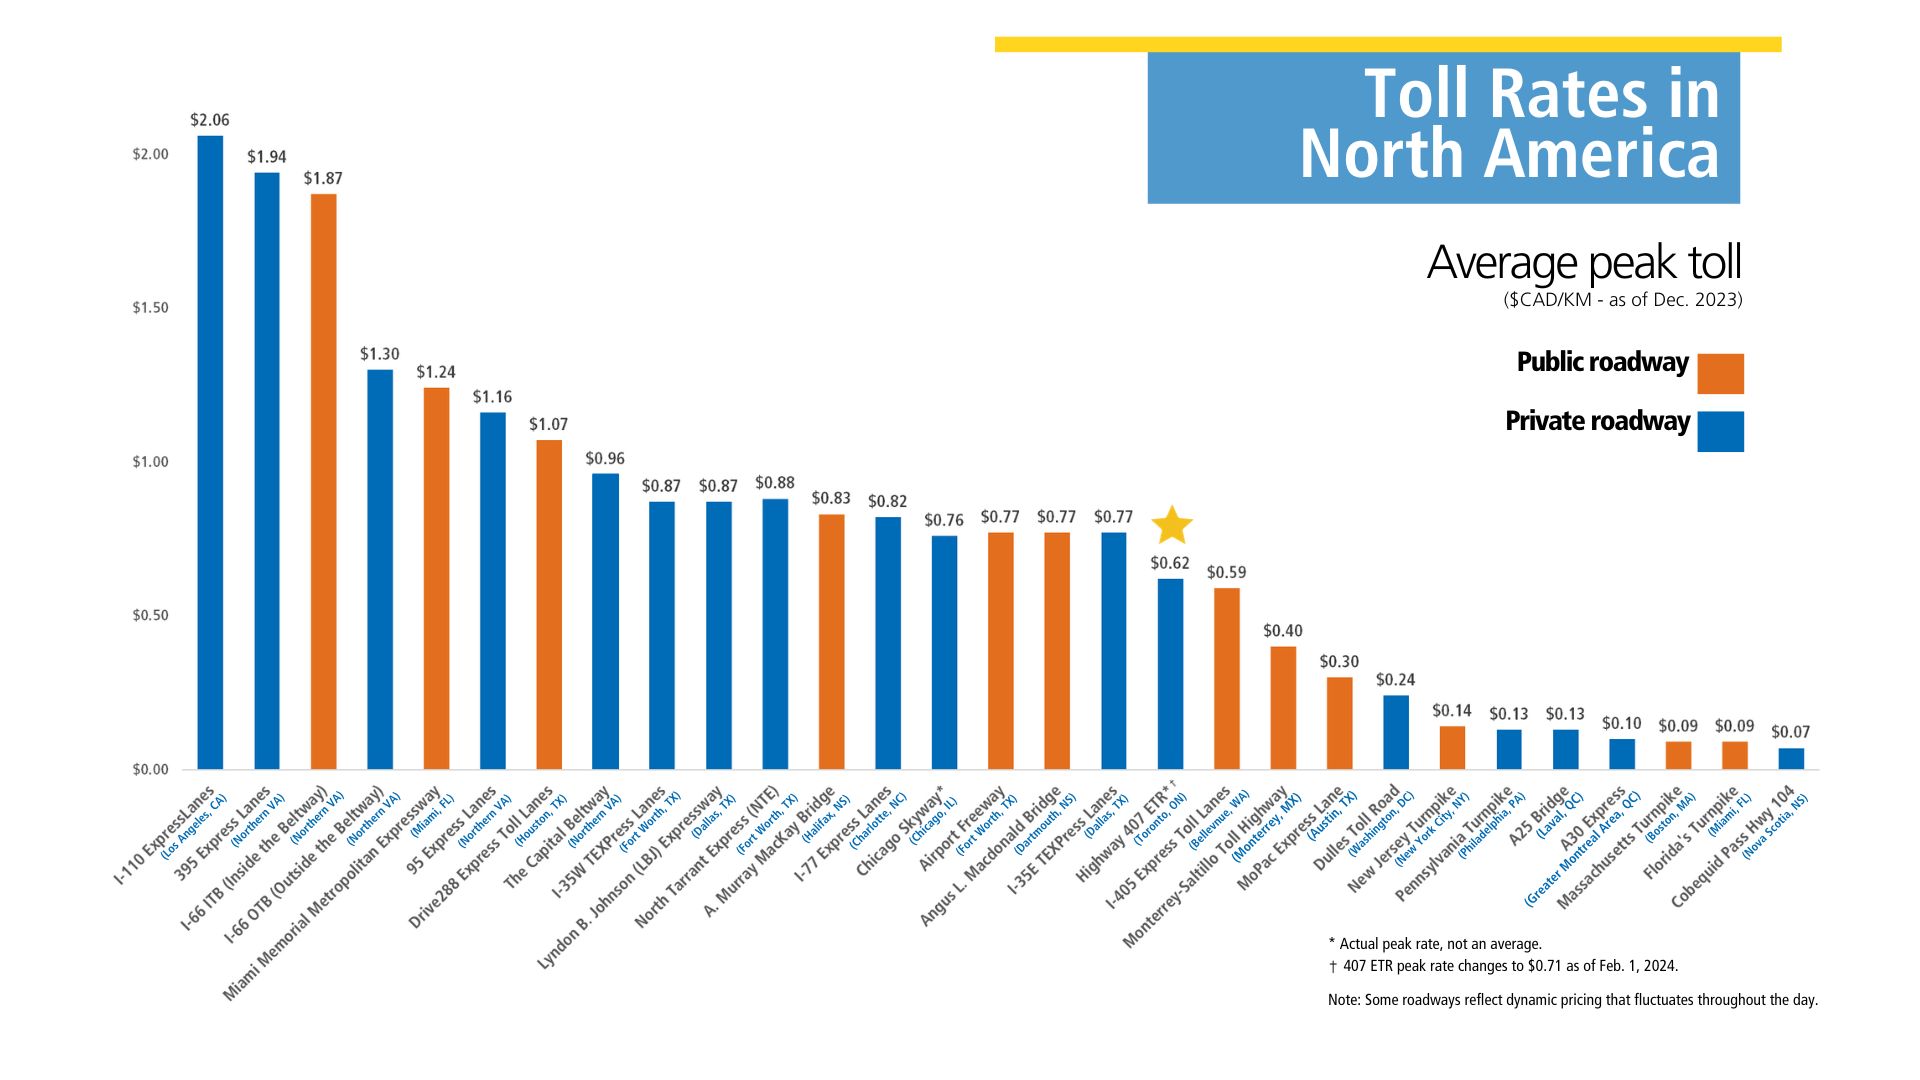 Toll rates in North America